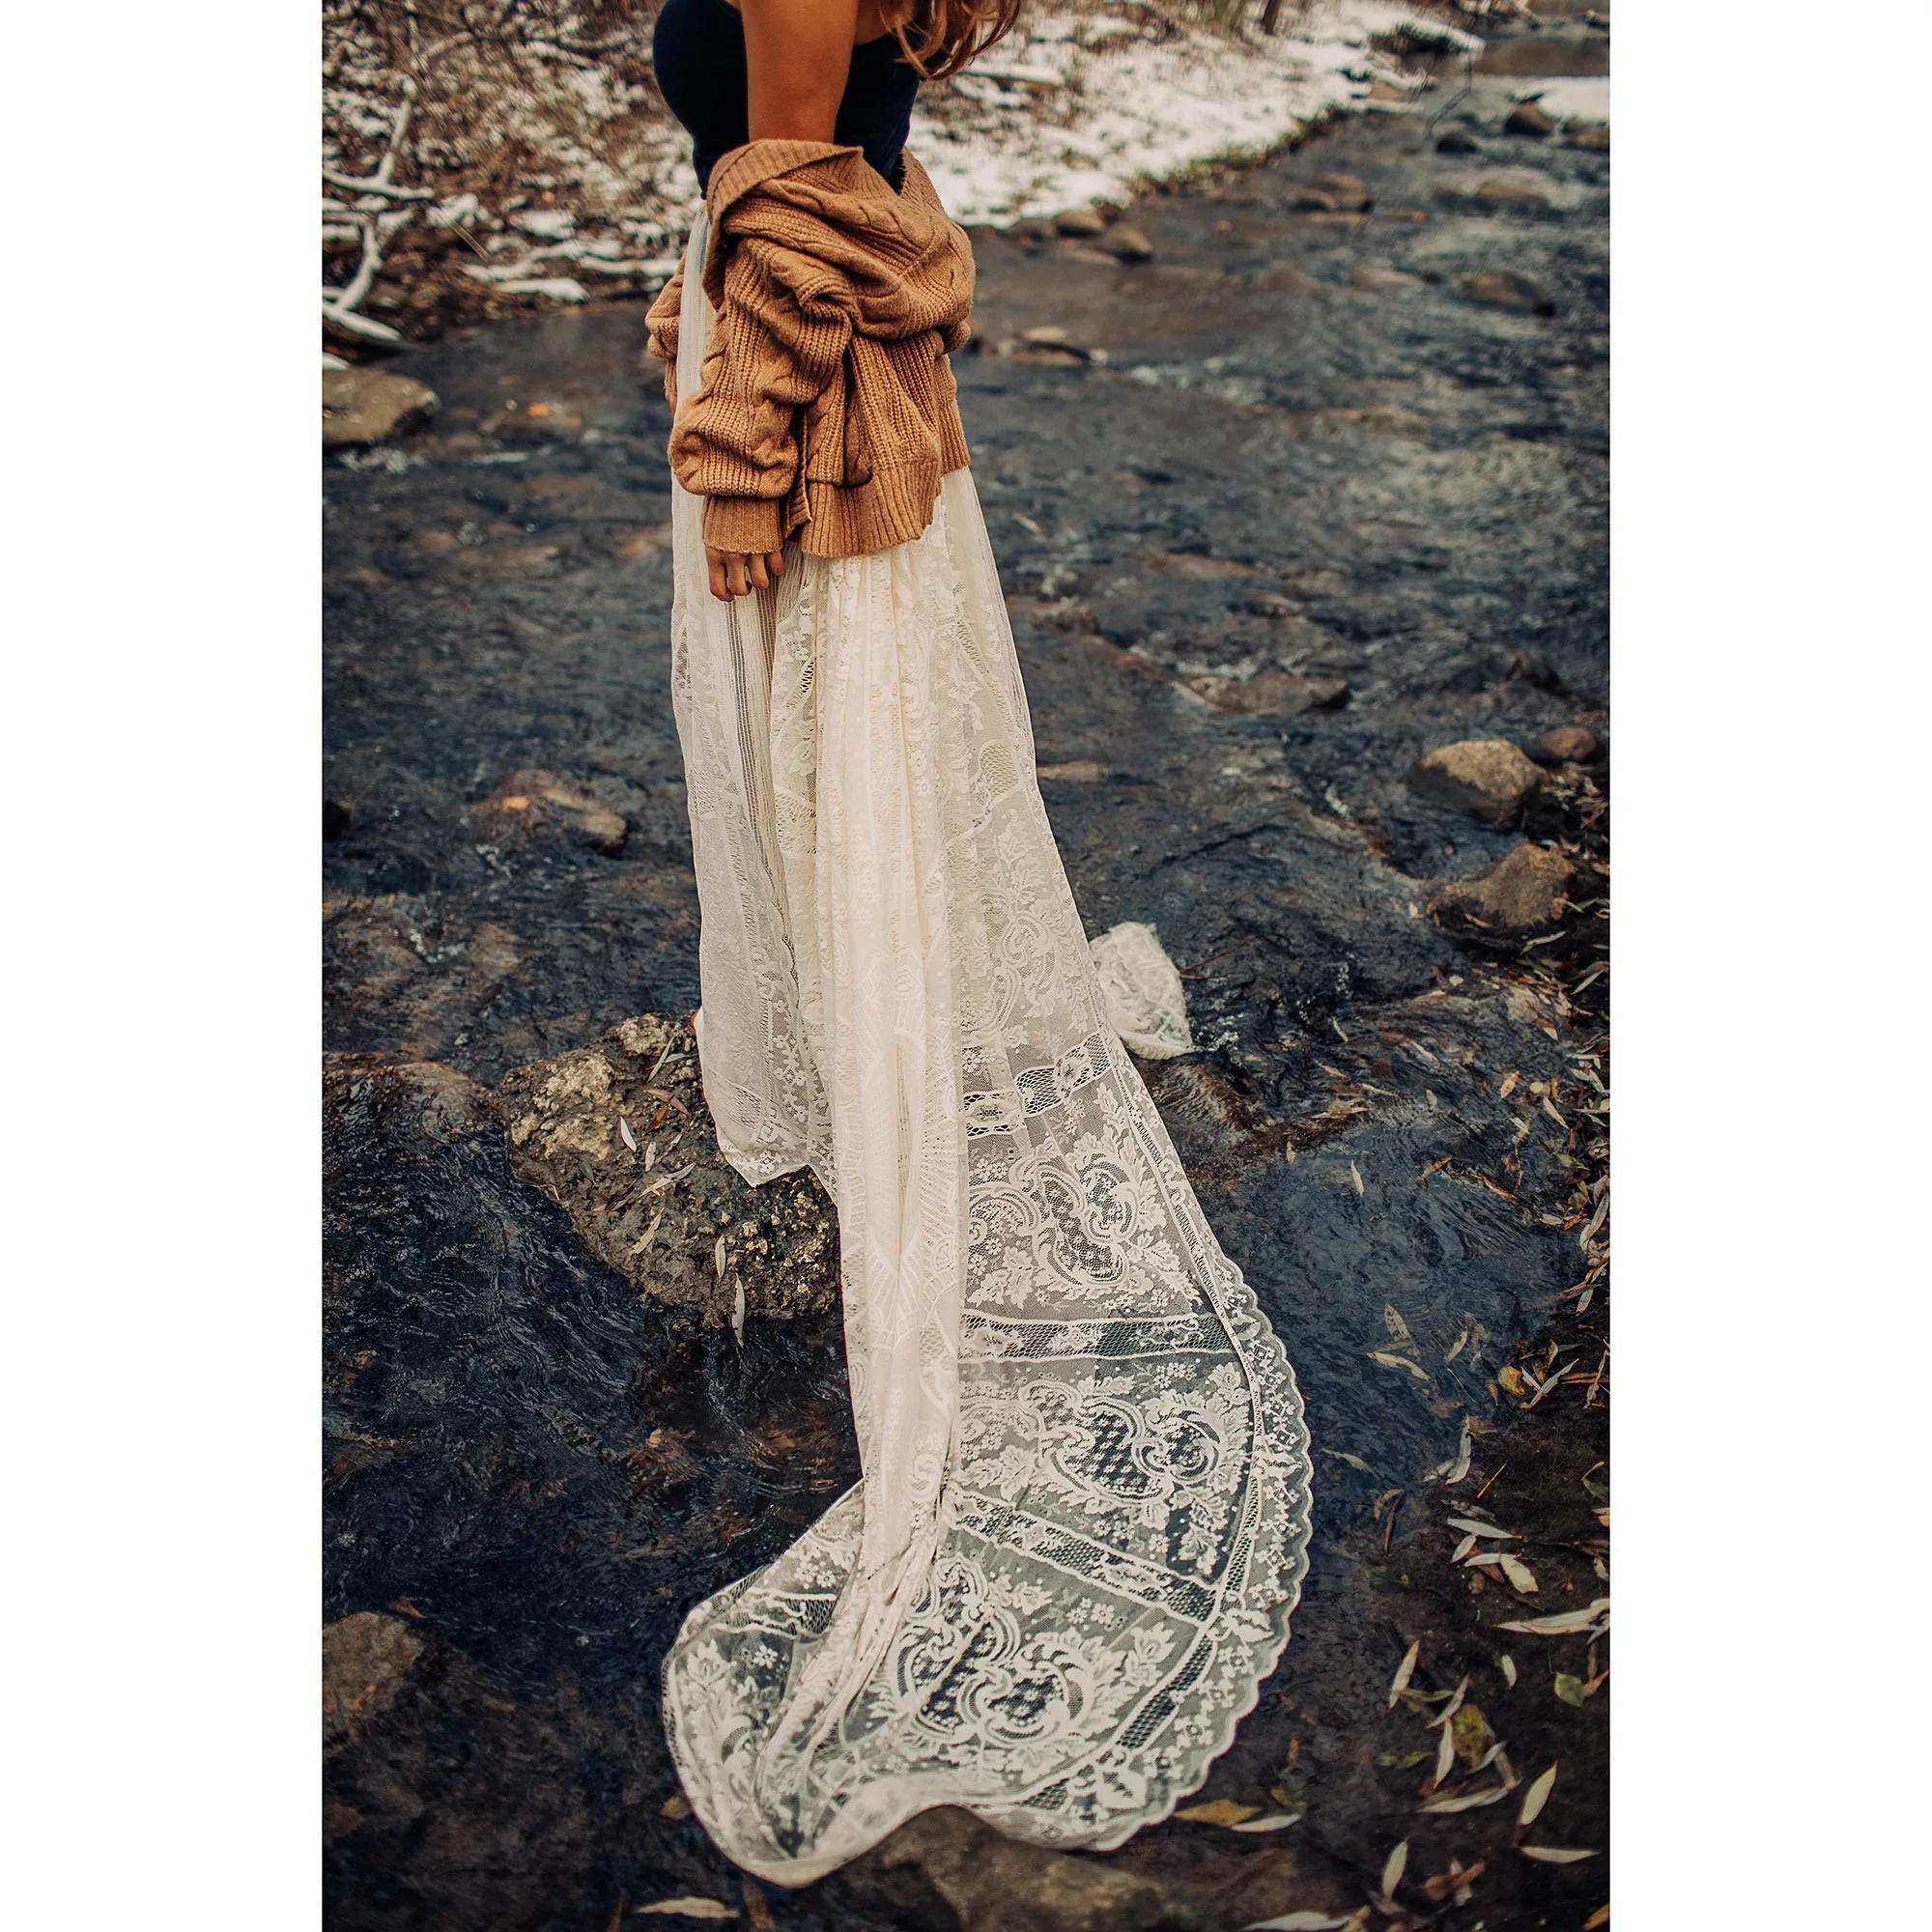 Photo Shoot Props Maxi Long Vintage Lace Maternity Skirt Pregnant Gown Party Evening Robe for Women Photogrpahy Accesssories